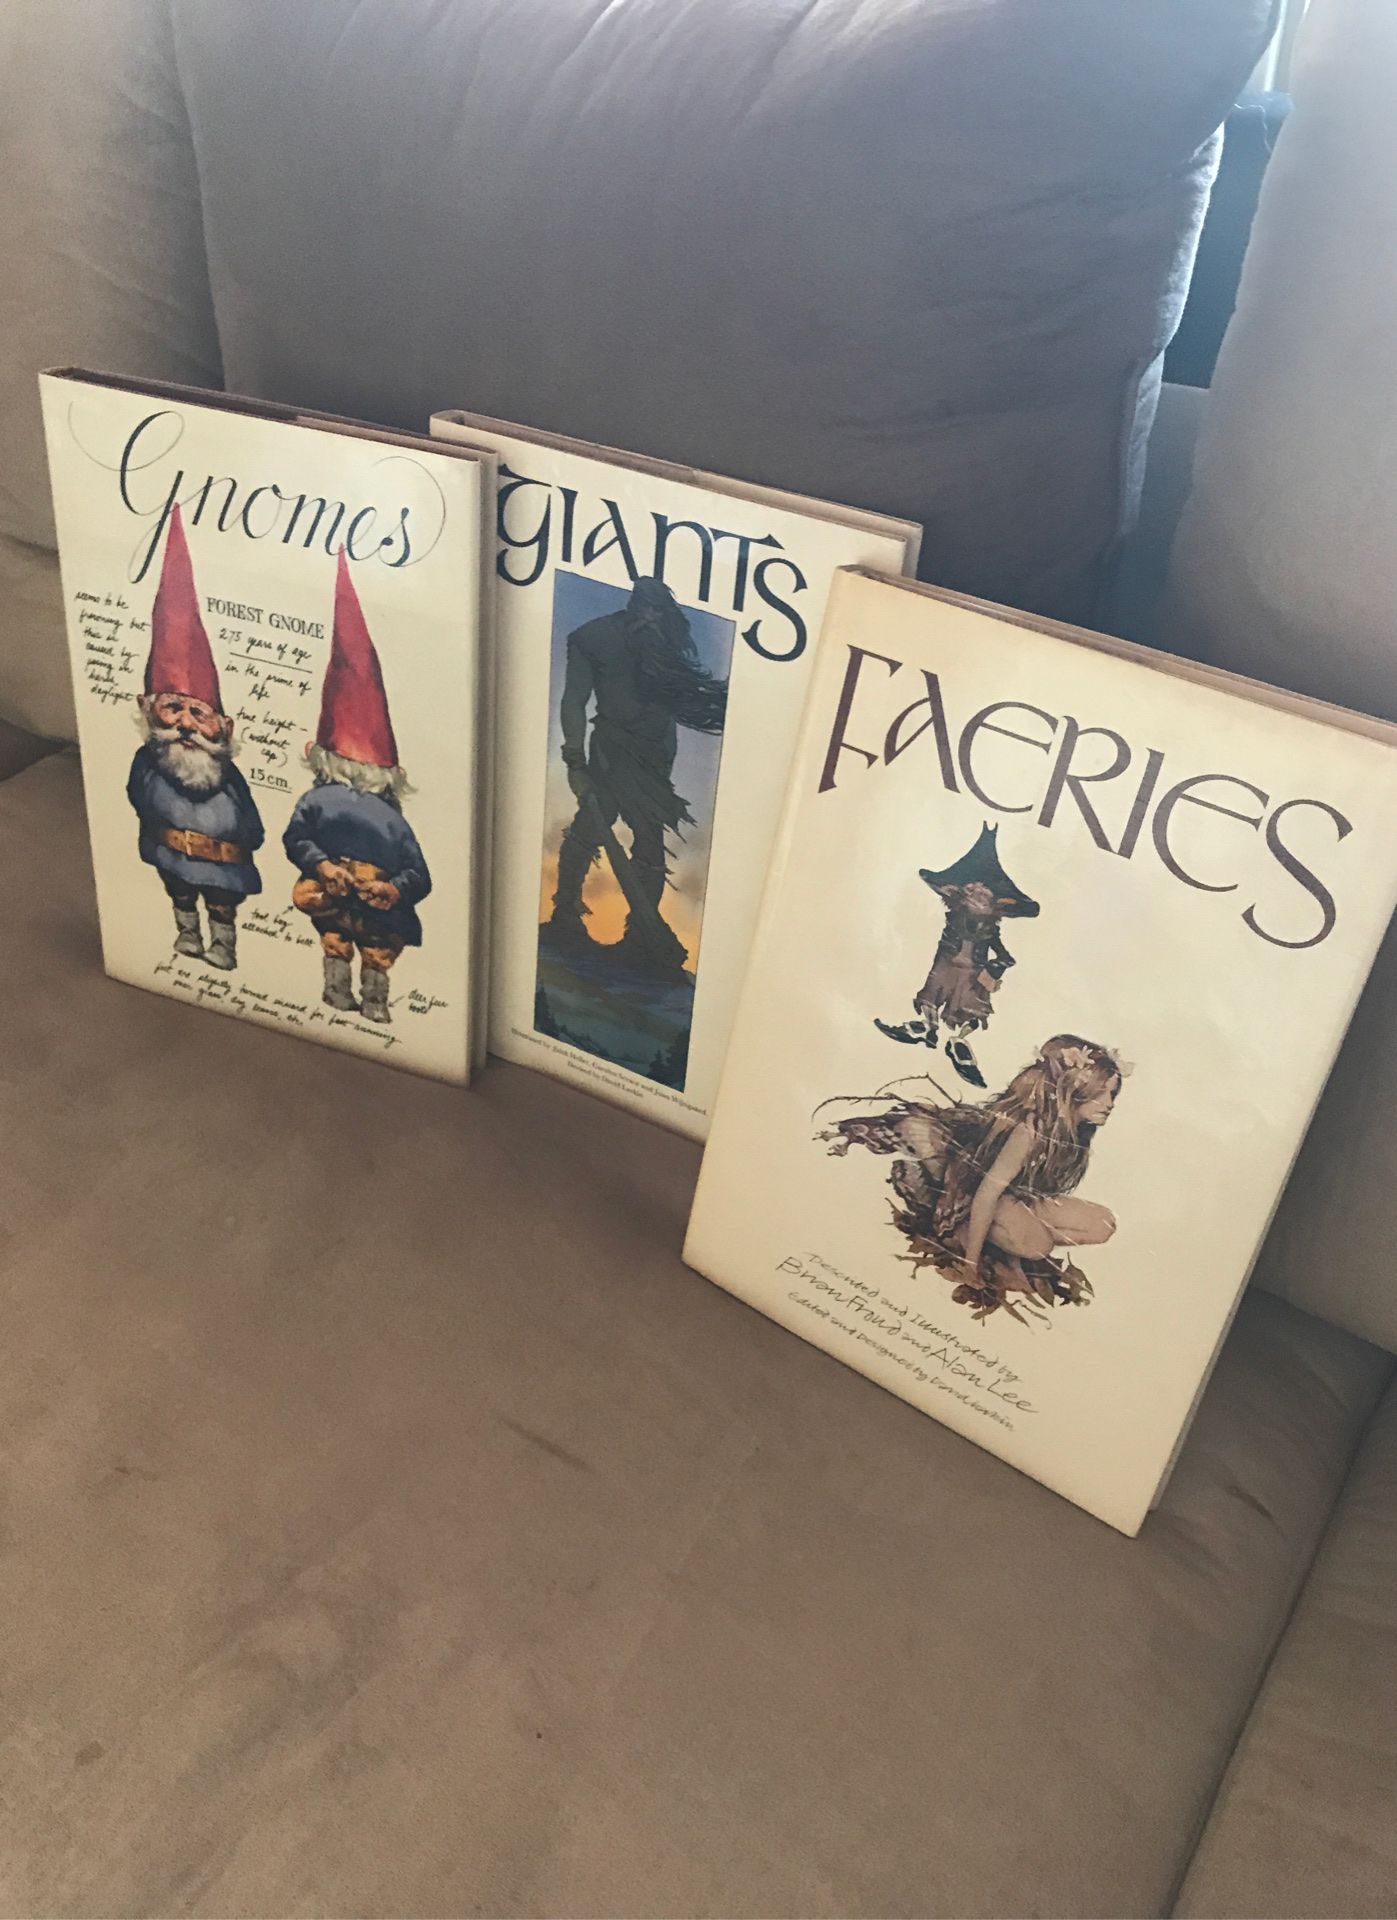 Set of 3 Illustrated Books - Gnomes - Giants - Faeries